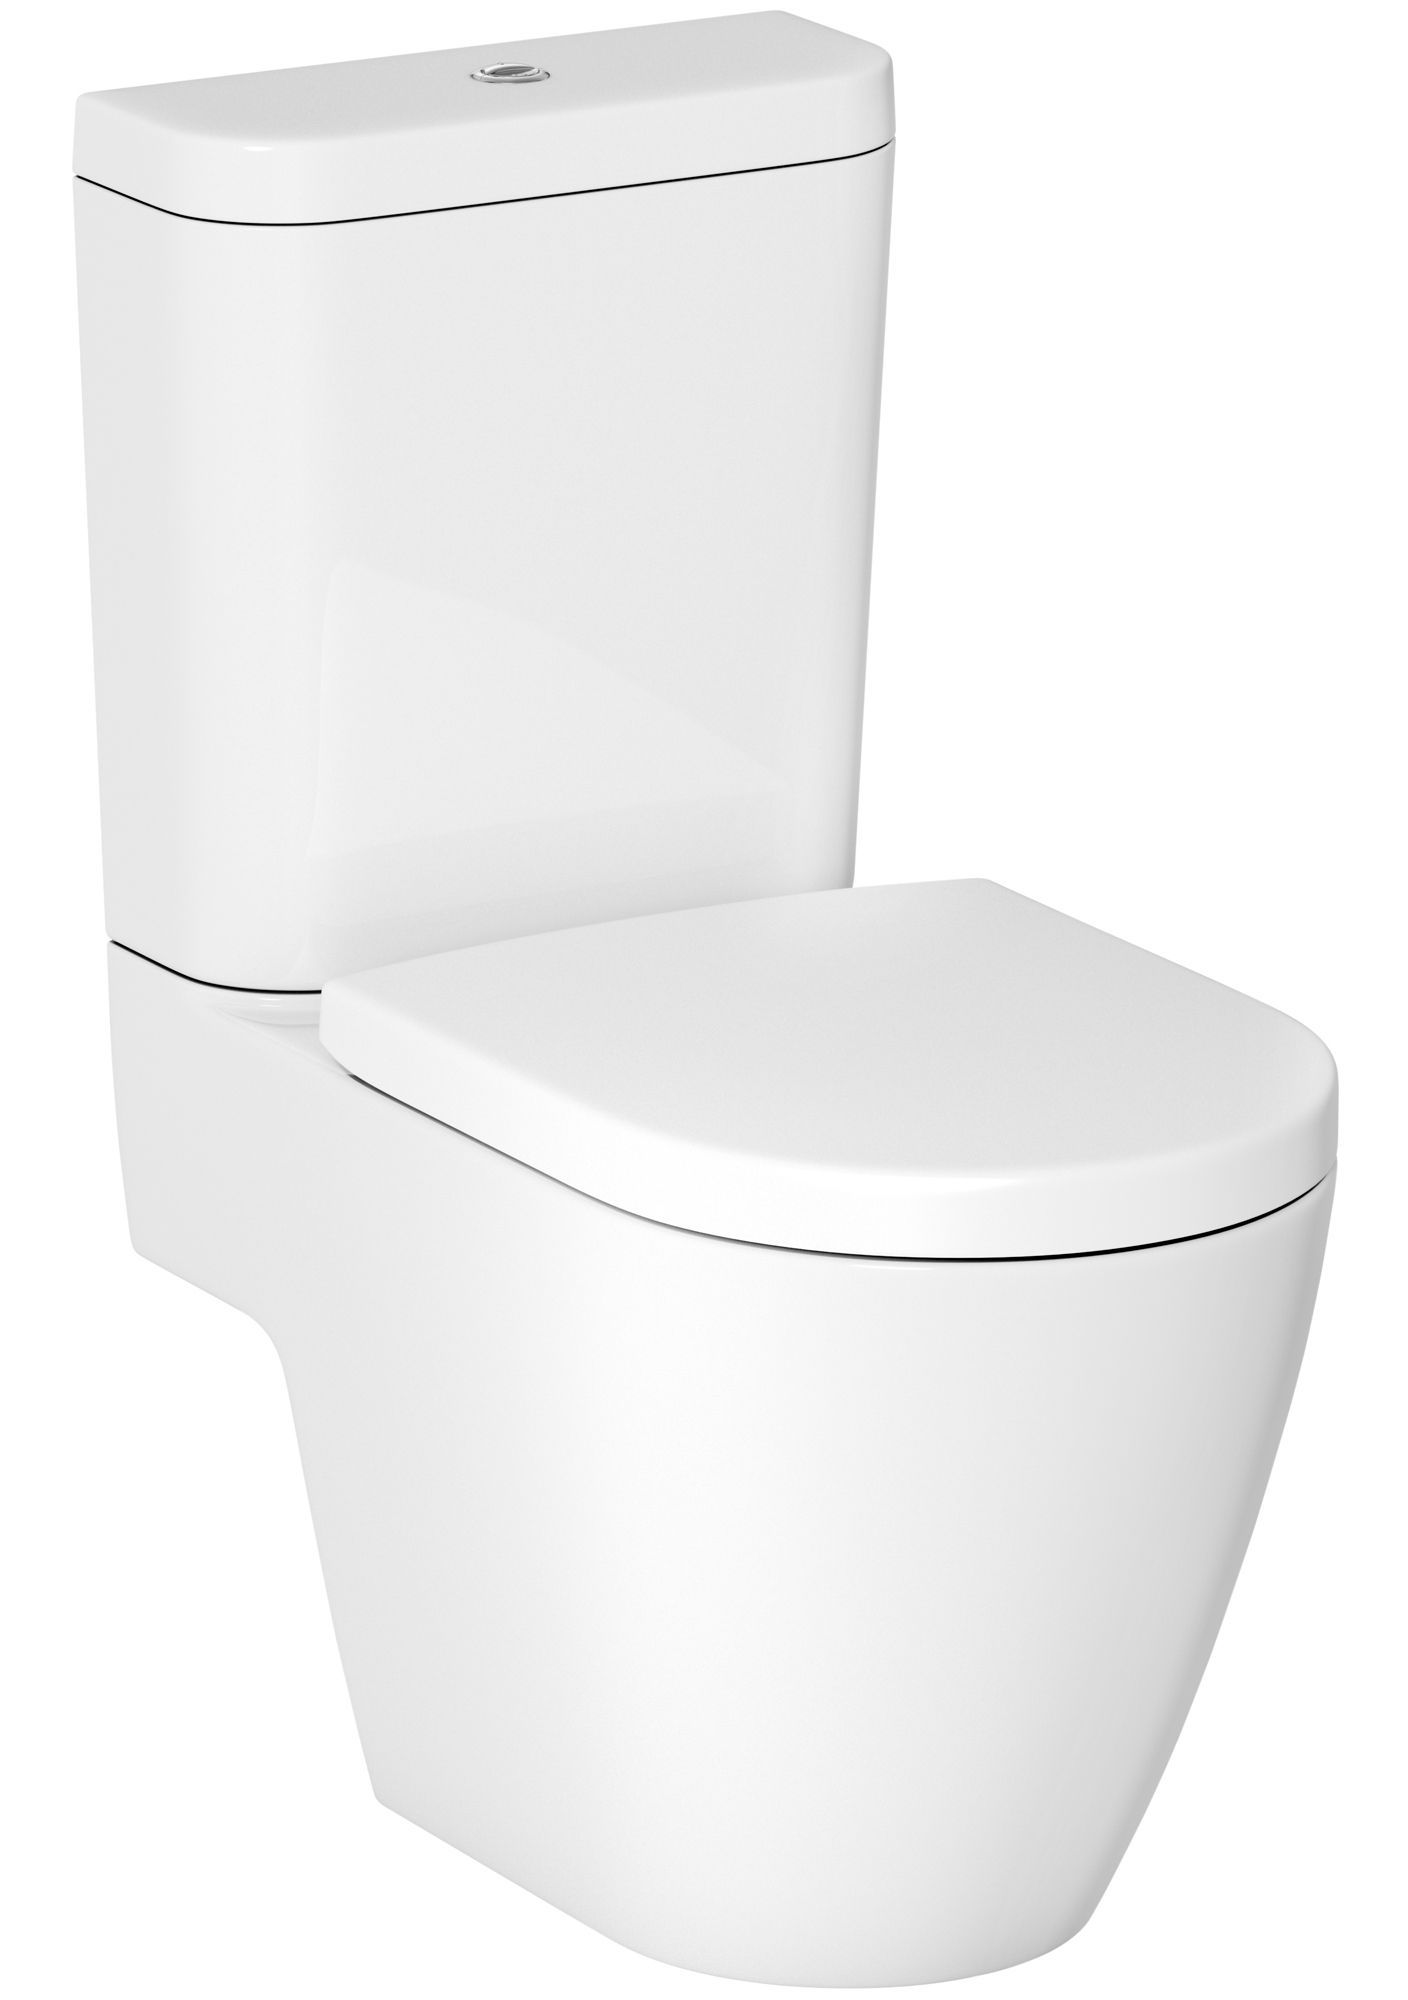 Cooke & Lewis Helena White Open back Close coupled Toilet with Soft close seat